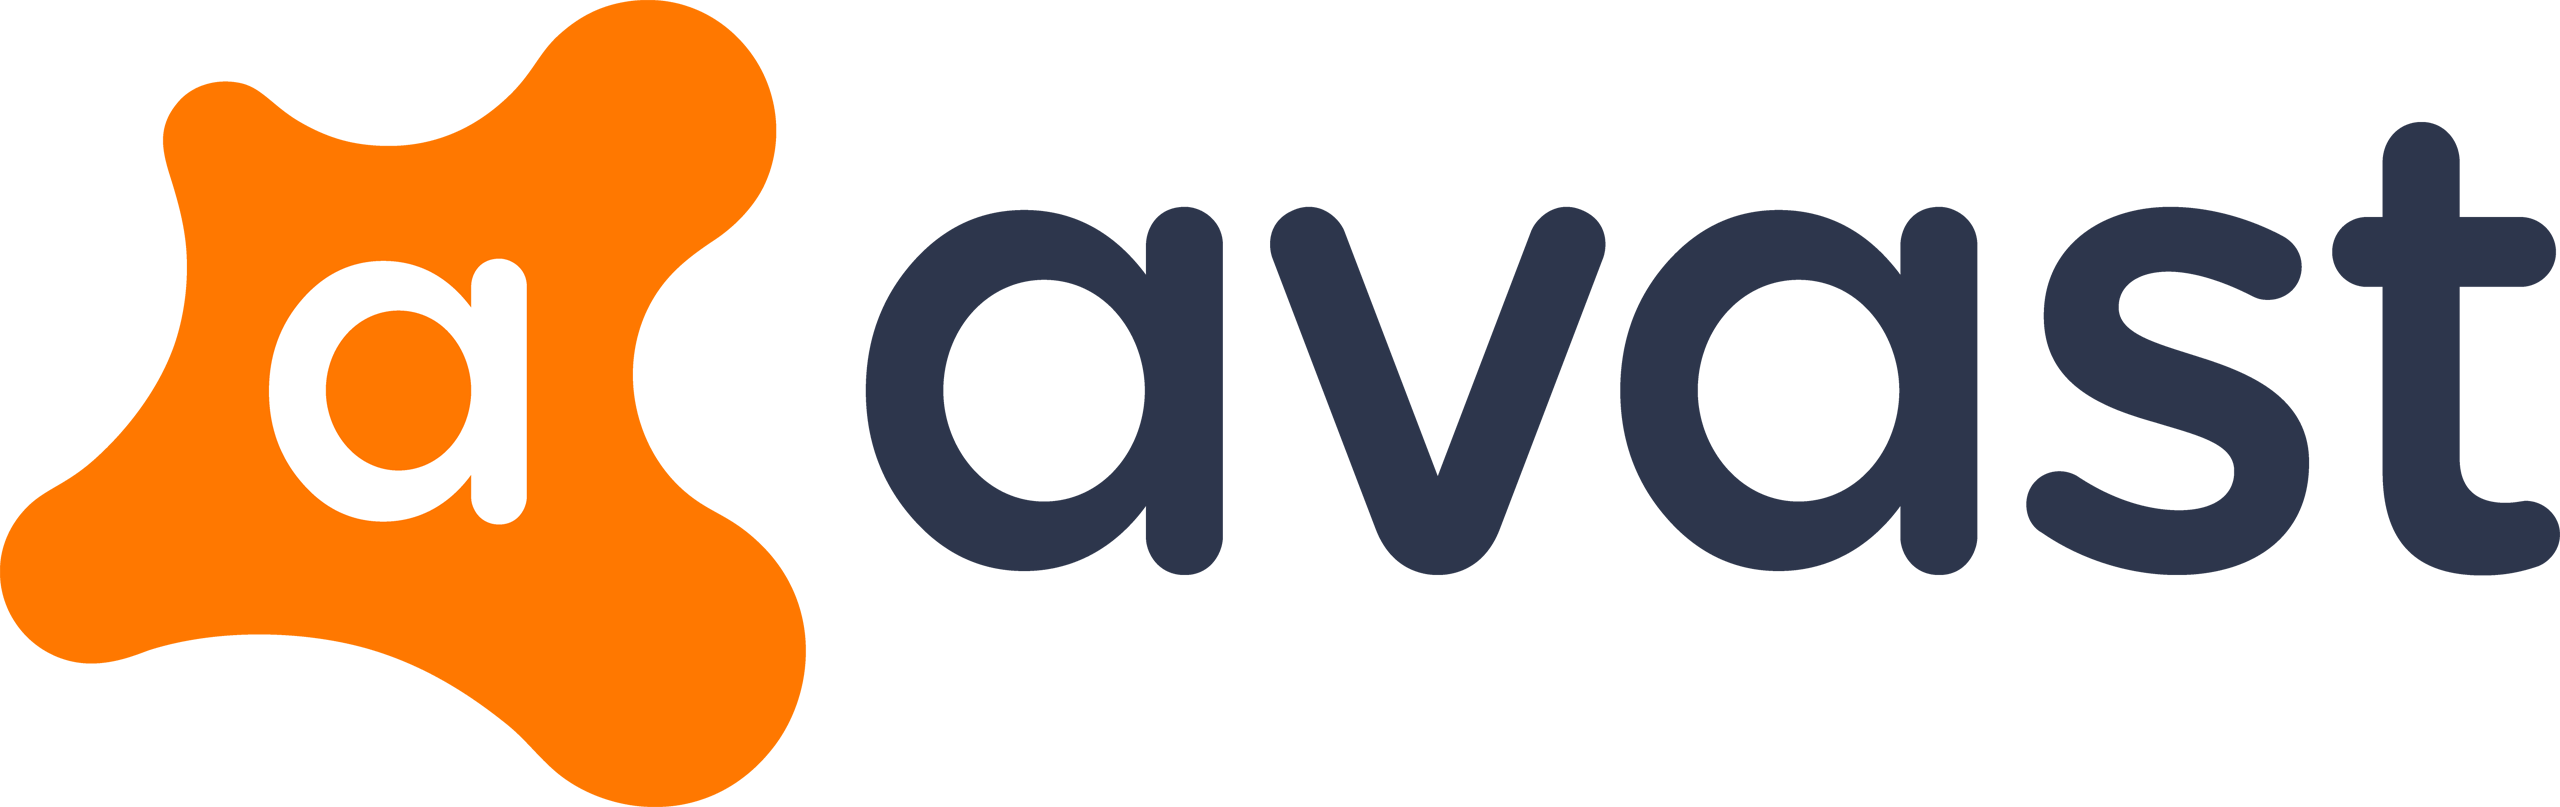 avast best for mac 2018